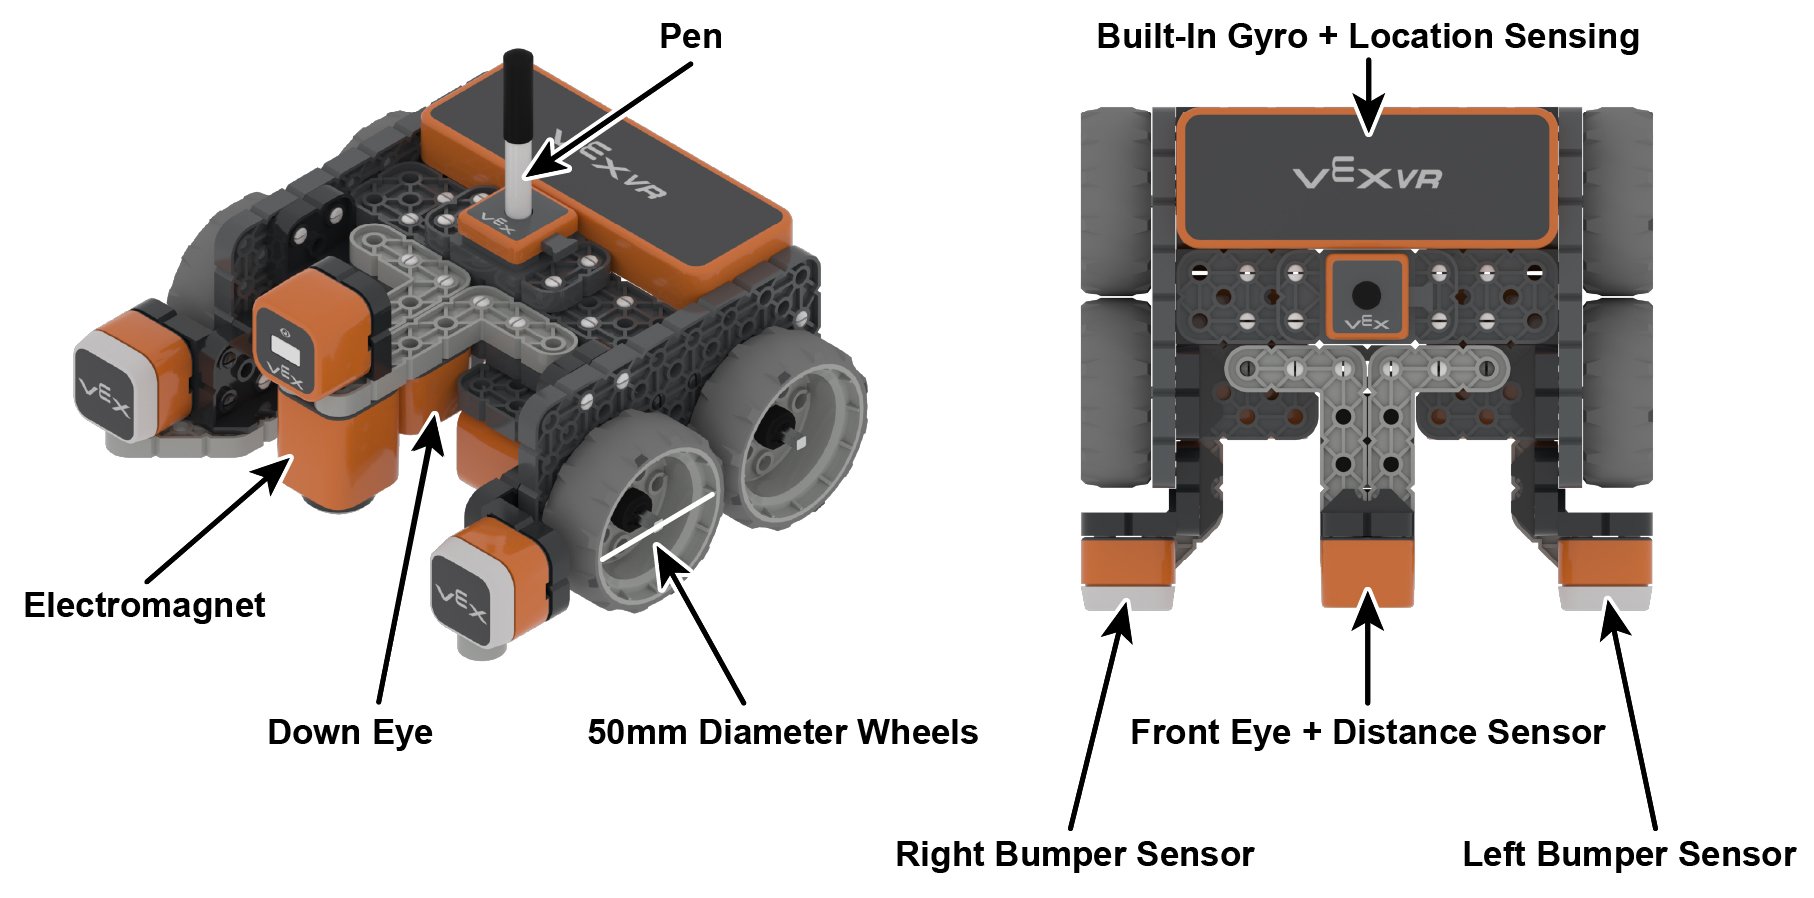 image of the VR Robot with features called out